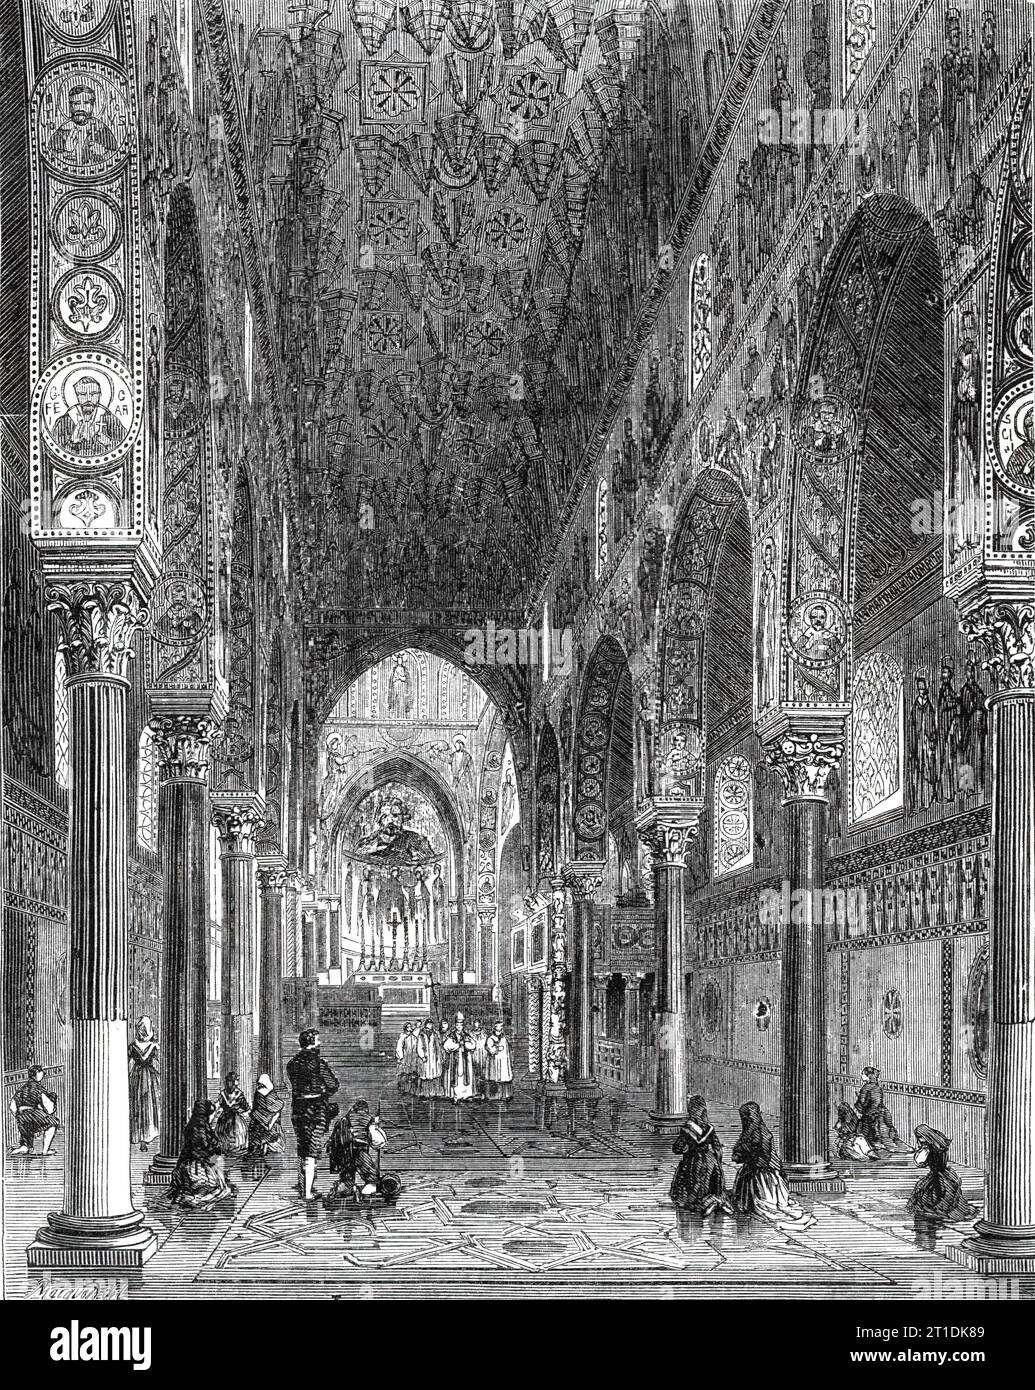 The Chapel Royal, Palermo, 1860. Interior of '...the splendid Capilla Reale...which may be said to unite three styles together - the Greek, Romanesque, and Saracenic, a combination only to be found in Sicily. This celebrated chapel is attached to the Palazzo Reale...It was built by Roger, the first Norman King of Sicily, and was finished in 1132...It possesses all the features of a large church - a nave, side aisles, and three apses. It is in the long Latin form, with a Greek cupola at the intersection of the cross. The pillars of the nave are probably taken from earlier buildings: some are of Stock Photo